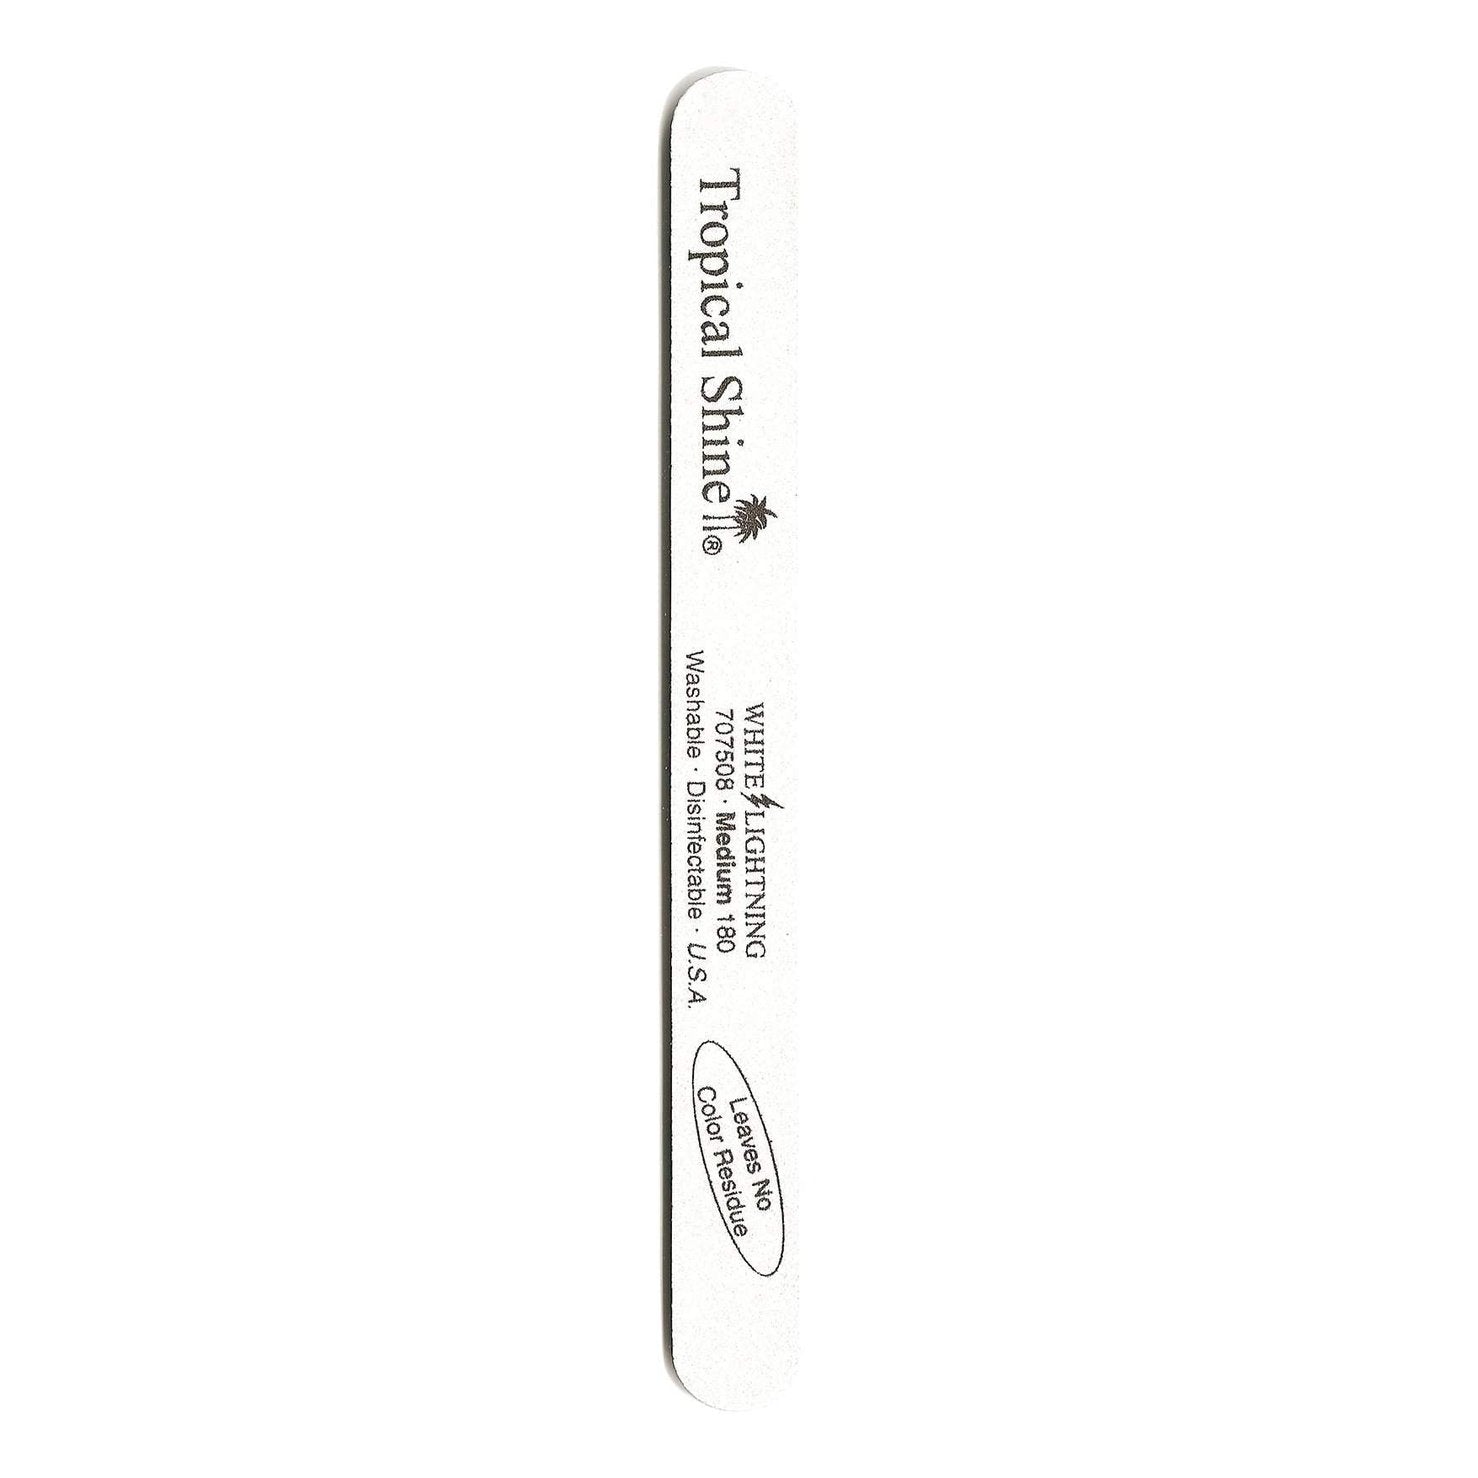 Tropical Shine Nail File White Lightning File 180 (Medium) 7 1/2 in x 3/4 in Large Size (707508)-Tropical Shine-Brand_Tropical Shine,Collection_Nails,Nail_Tools,Tool_Nails